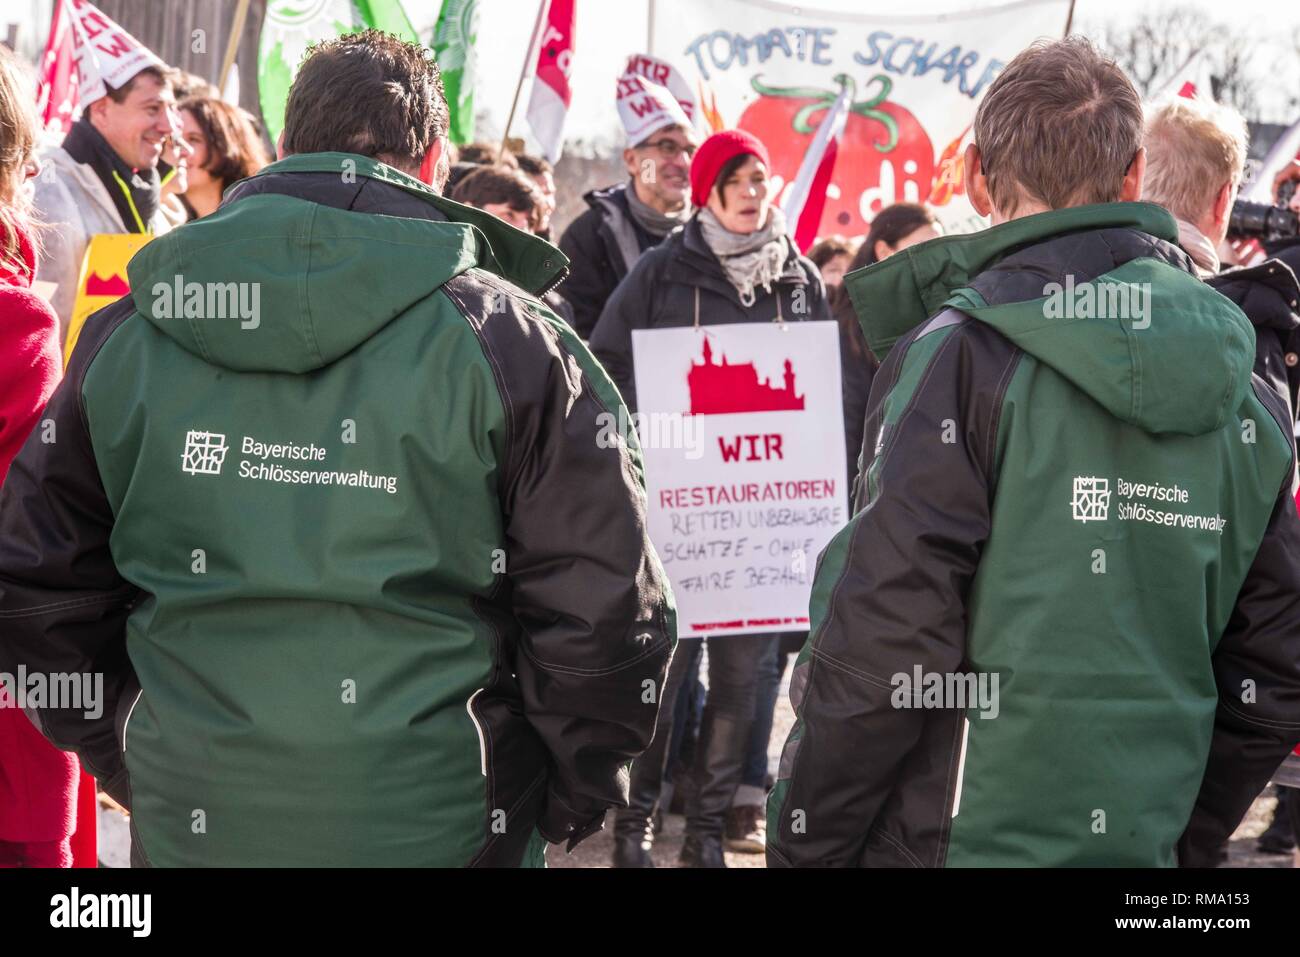 Munich, Bavaria, Germany. 14th Feb, 2019. Uniformed employees of the Bayerische Schloesserverwaltung were in attendance. To signify the failure of the second round of talks with employers, the German Verdi Ver.di labor union organized a 200  strong flashmob action at the famed Schloss Nymphenburg in Munich to kick off a new strike wave. Credit: ZUMA Press, Inc./Alamy Live News Stock Photo